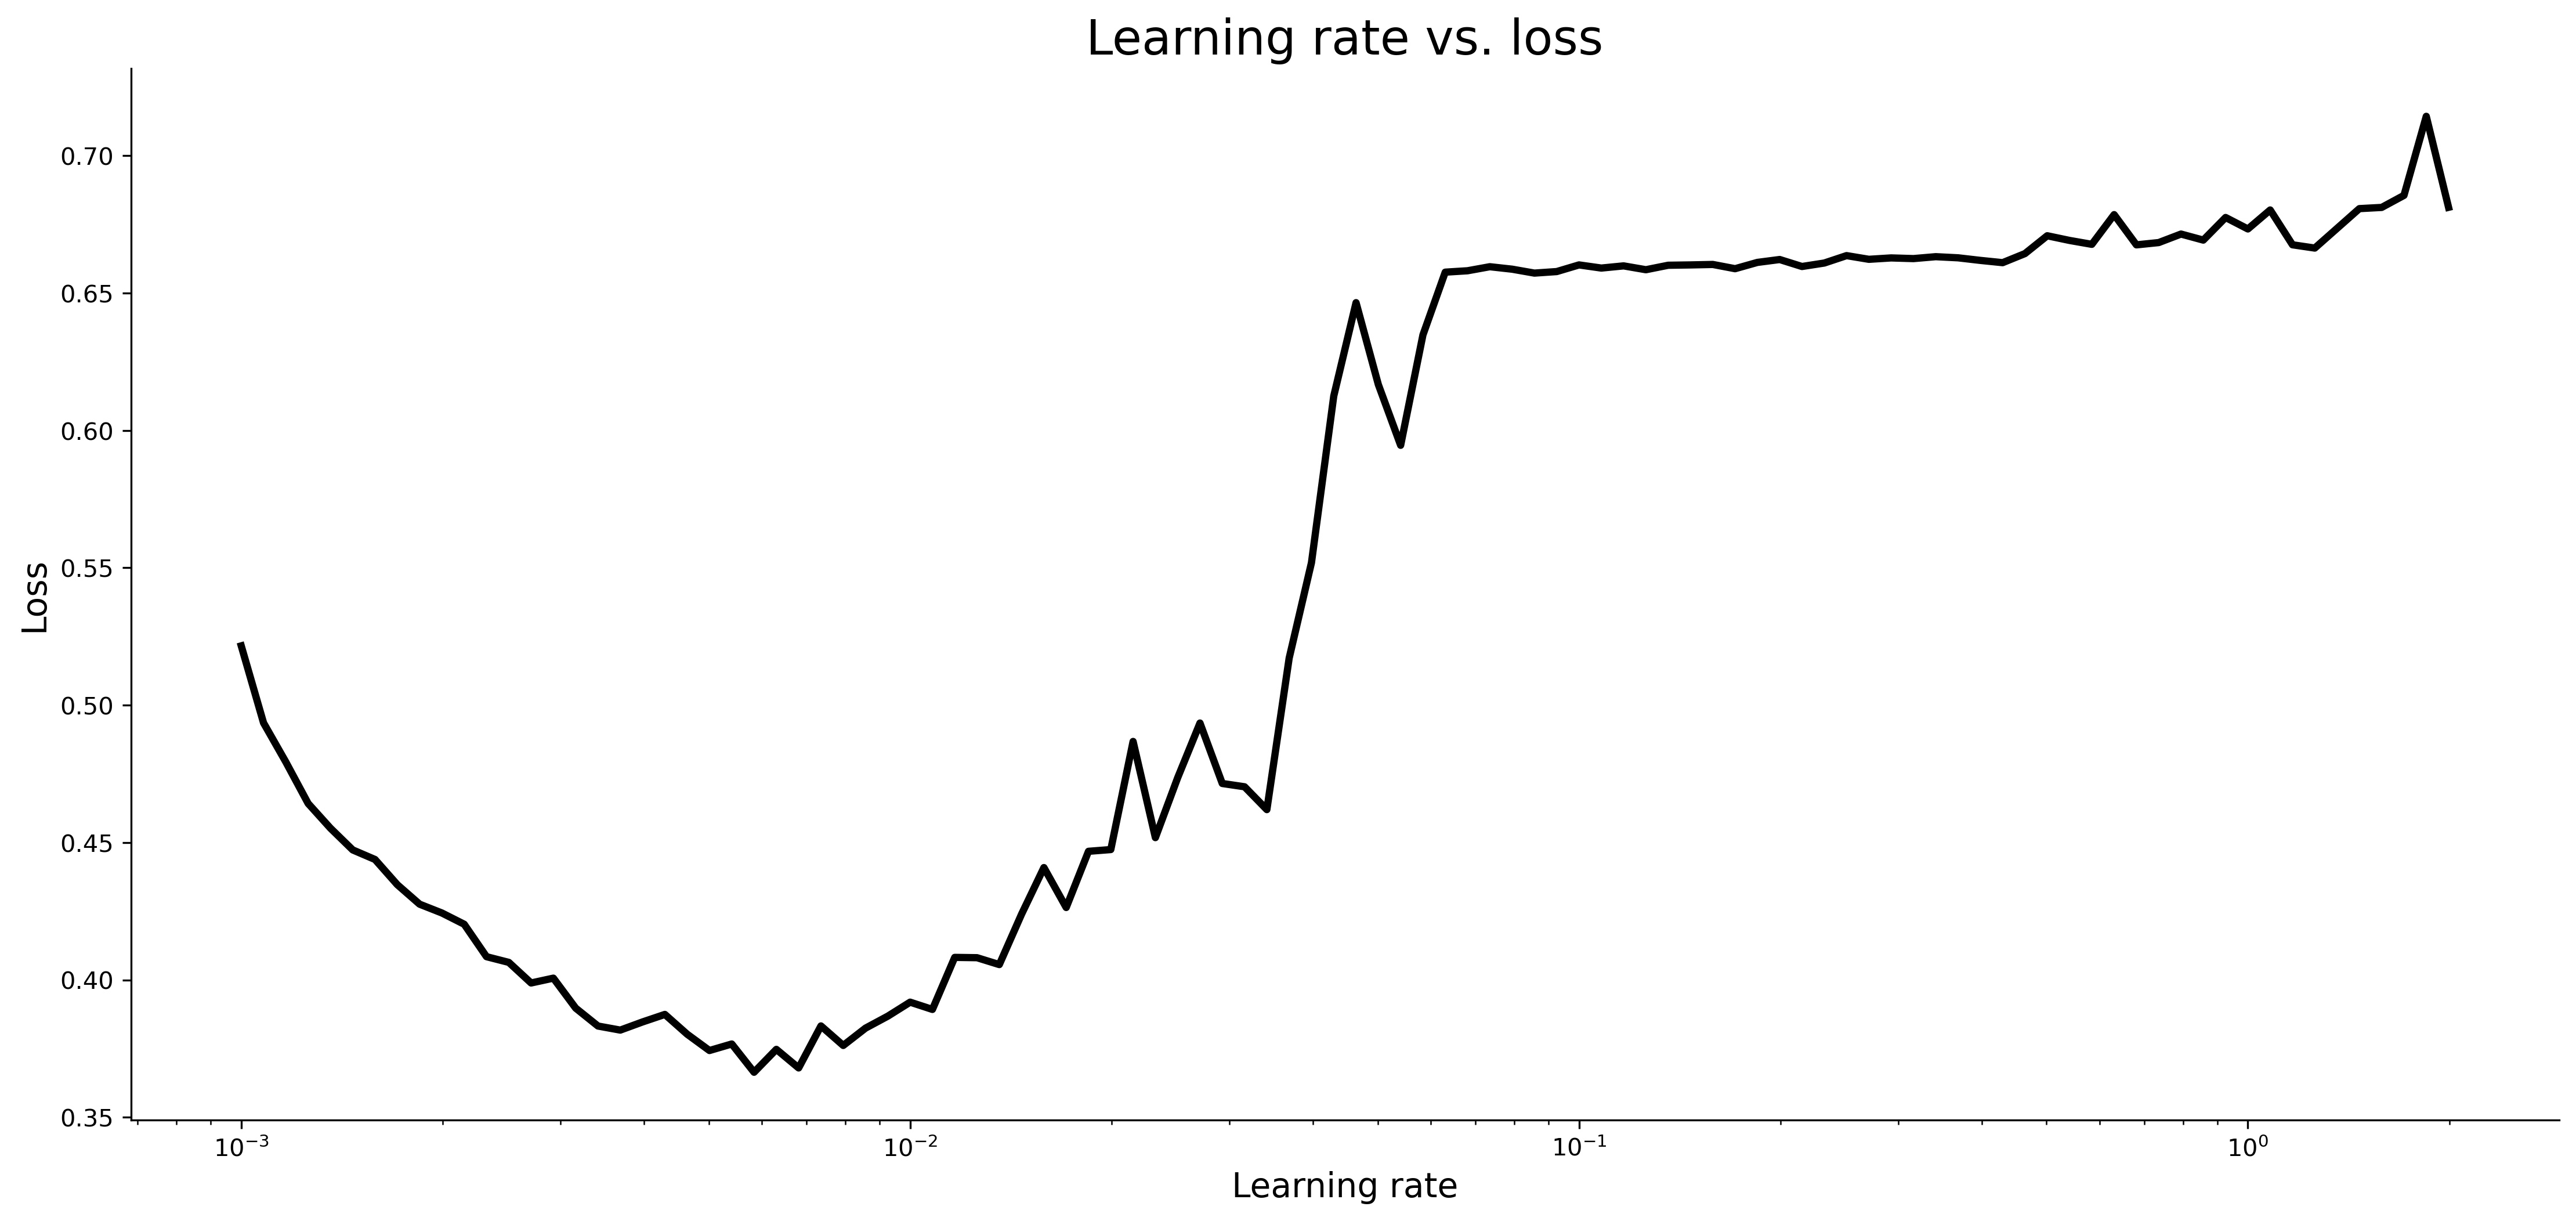 Image 7 — Learning rate vs. loss (image by author)